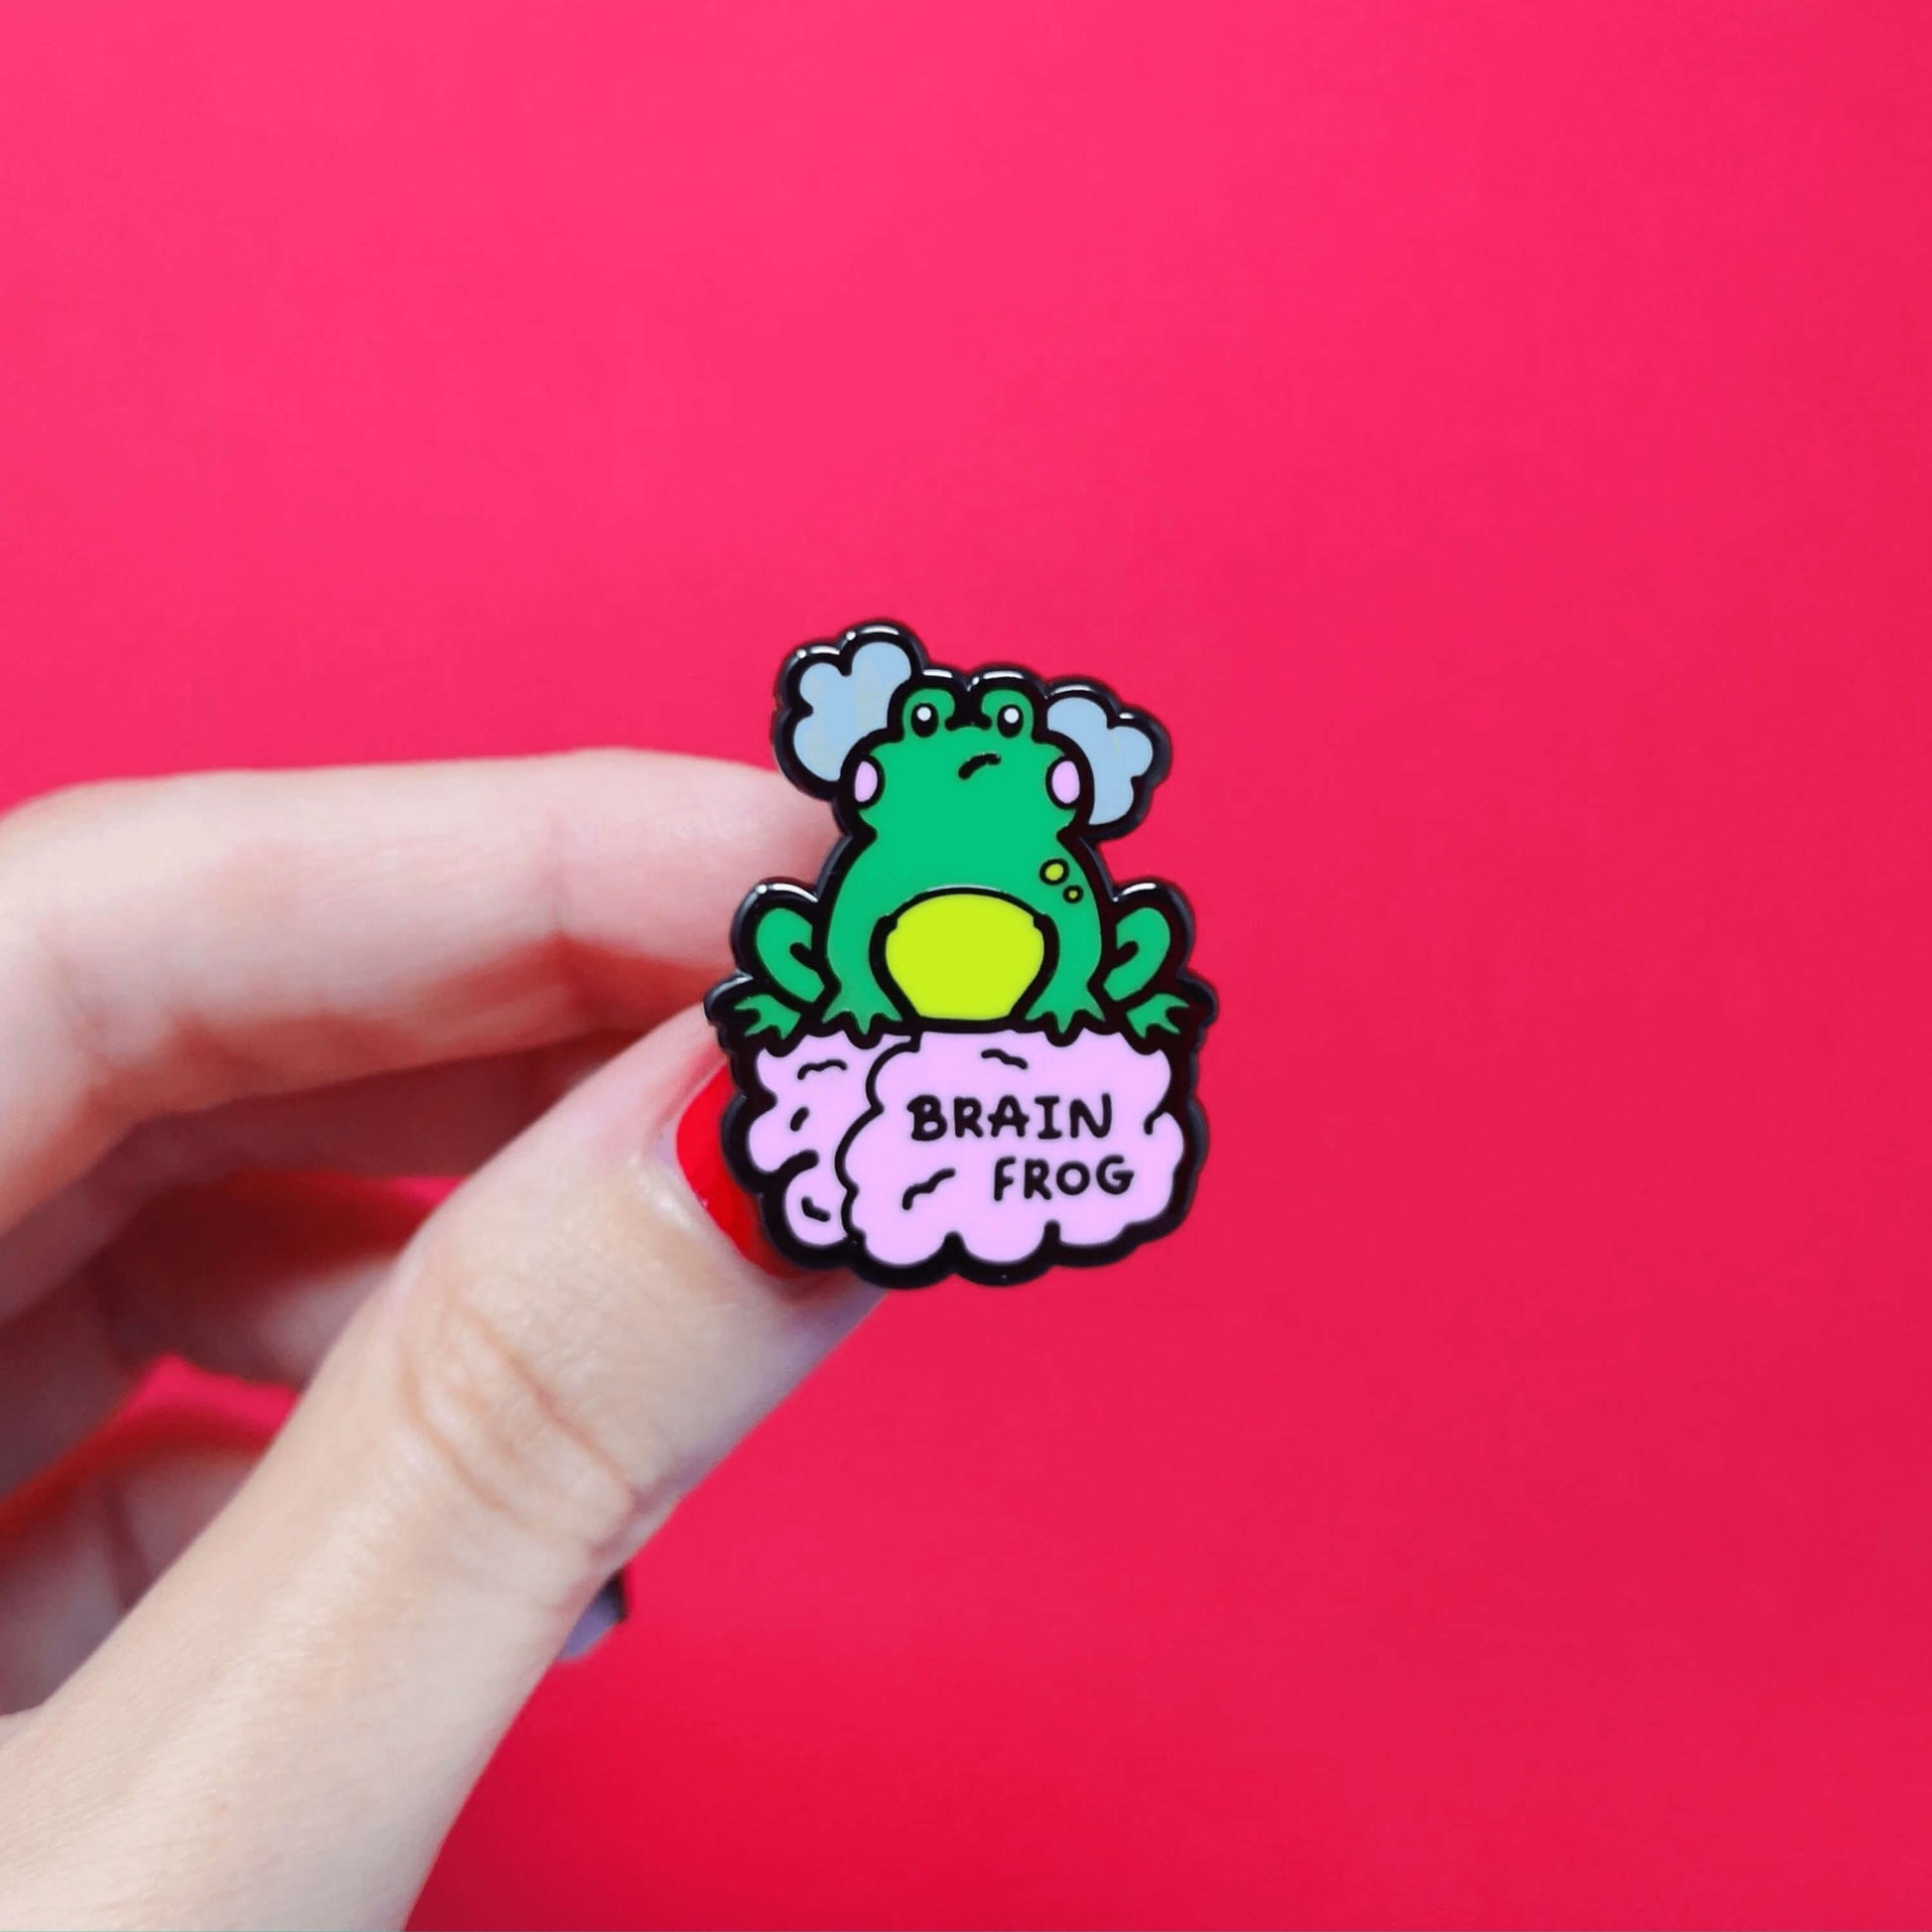 The Brain Frog Enamel Pin - Brain Fog being held over a red background. The pin is of a green frog with pink blush cheeks looking confused with two grey clouds by its head, it is sat on a pink brain with the text reading Brain Frog. The design is raising awareness for brain fog.